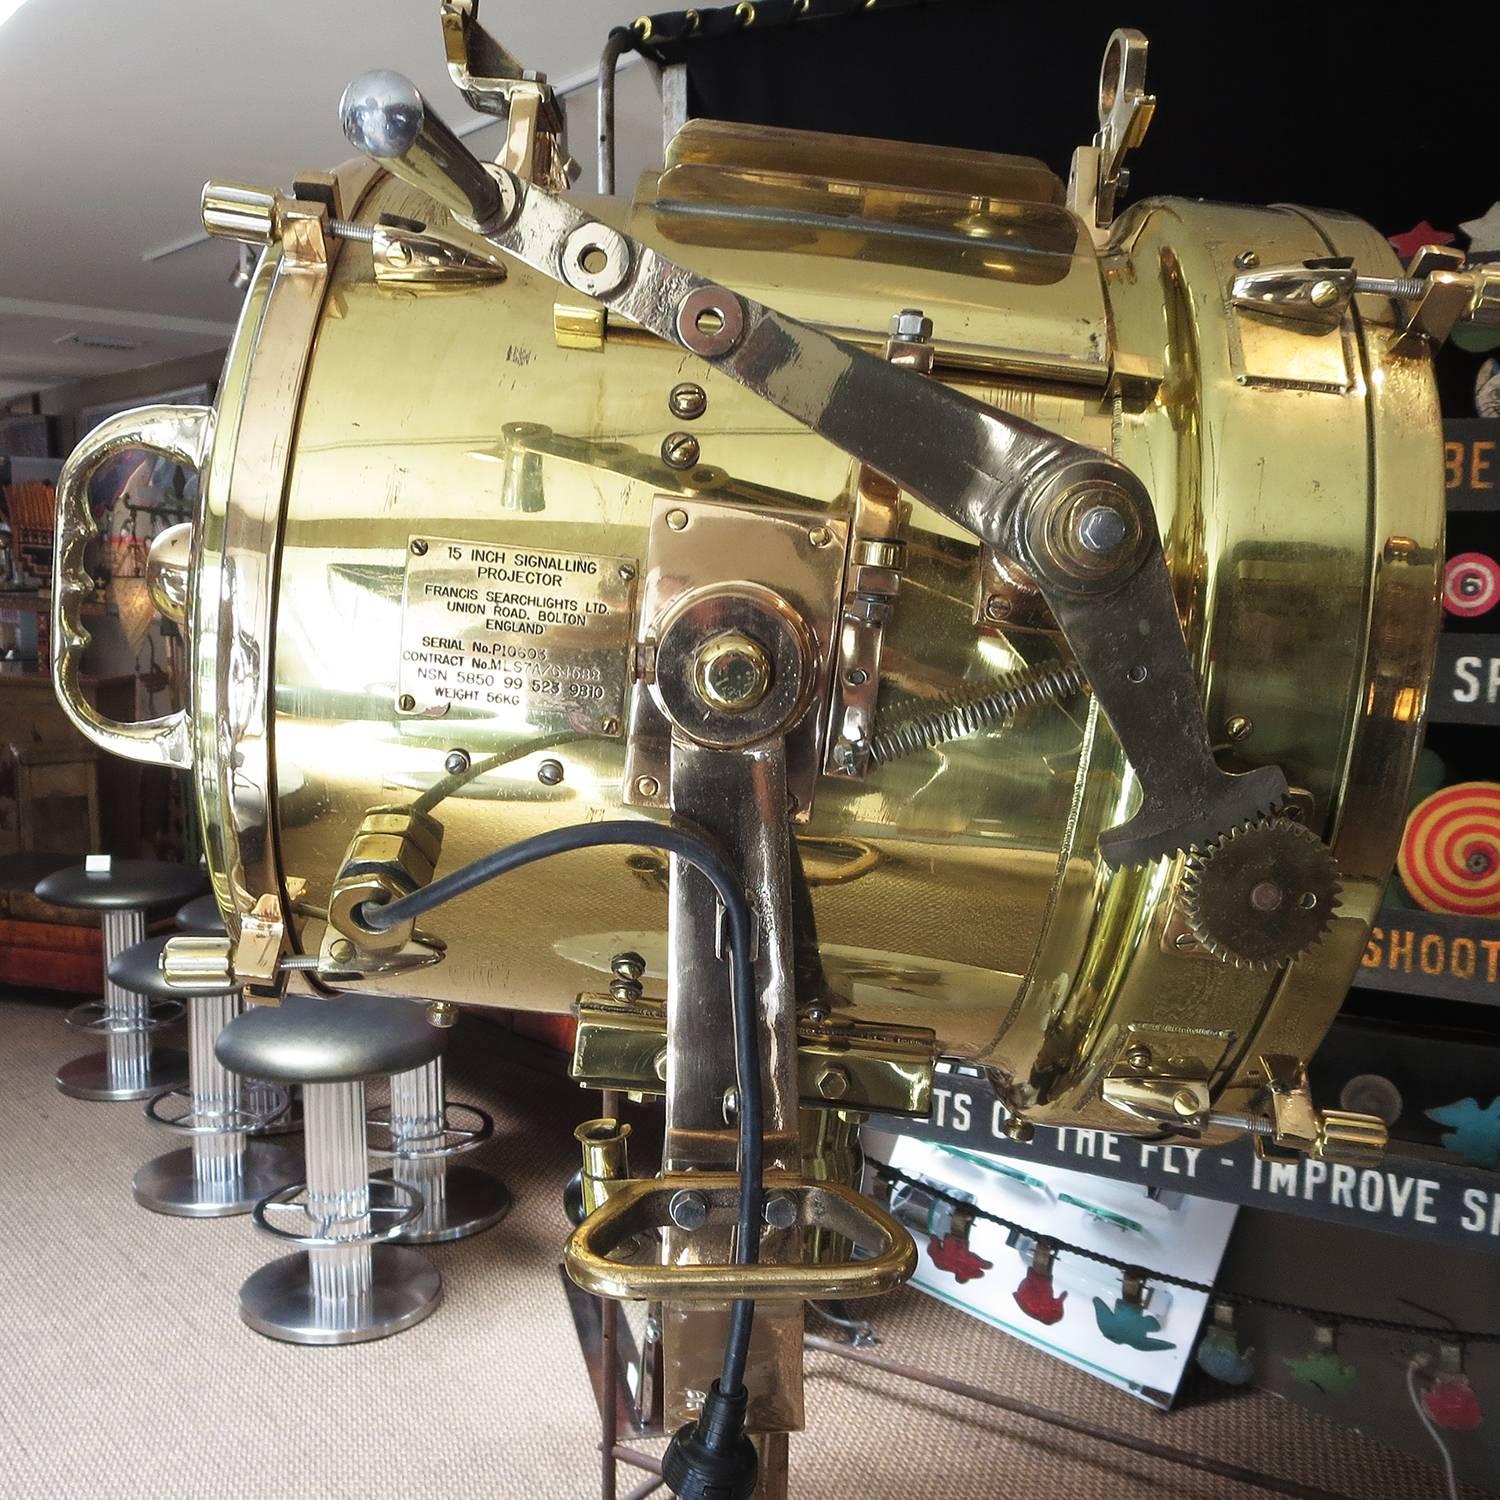 Used on the decks of British naval vessels, this powerful projector would send lighted signals in Morse code. By manually pulling the spring loaded lever arm, one could open the face flaps to send a long 